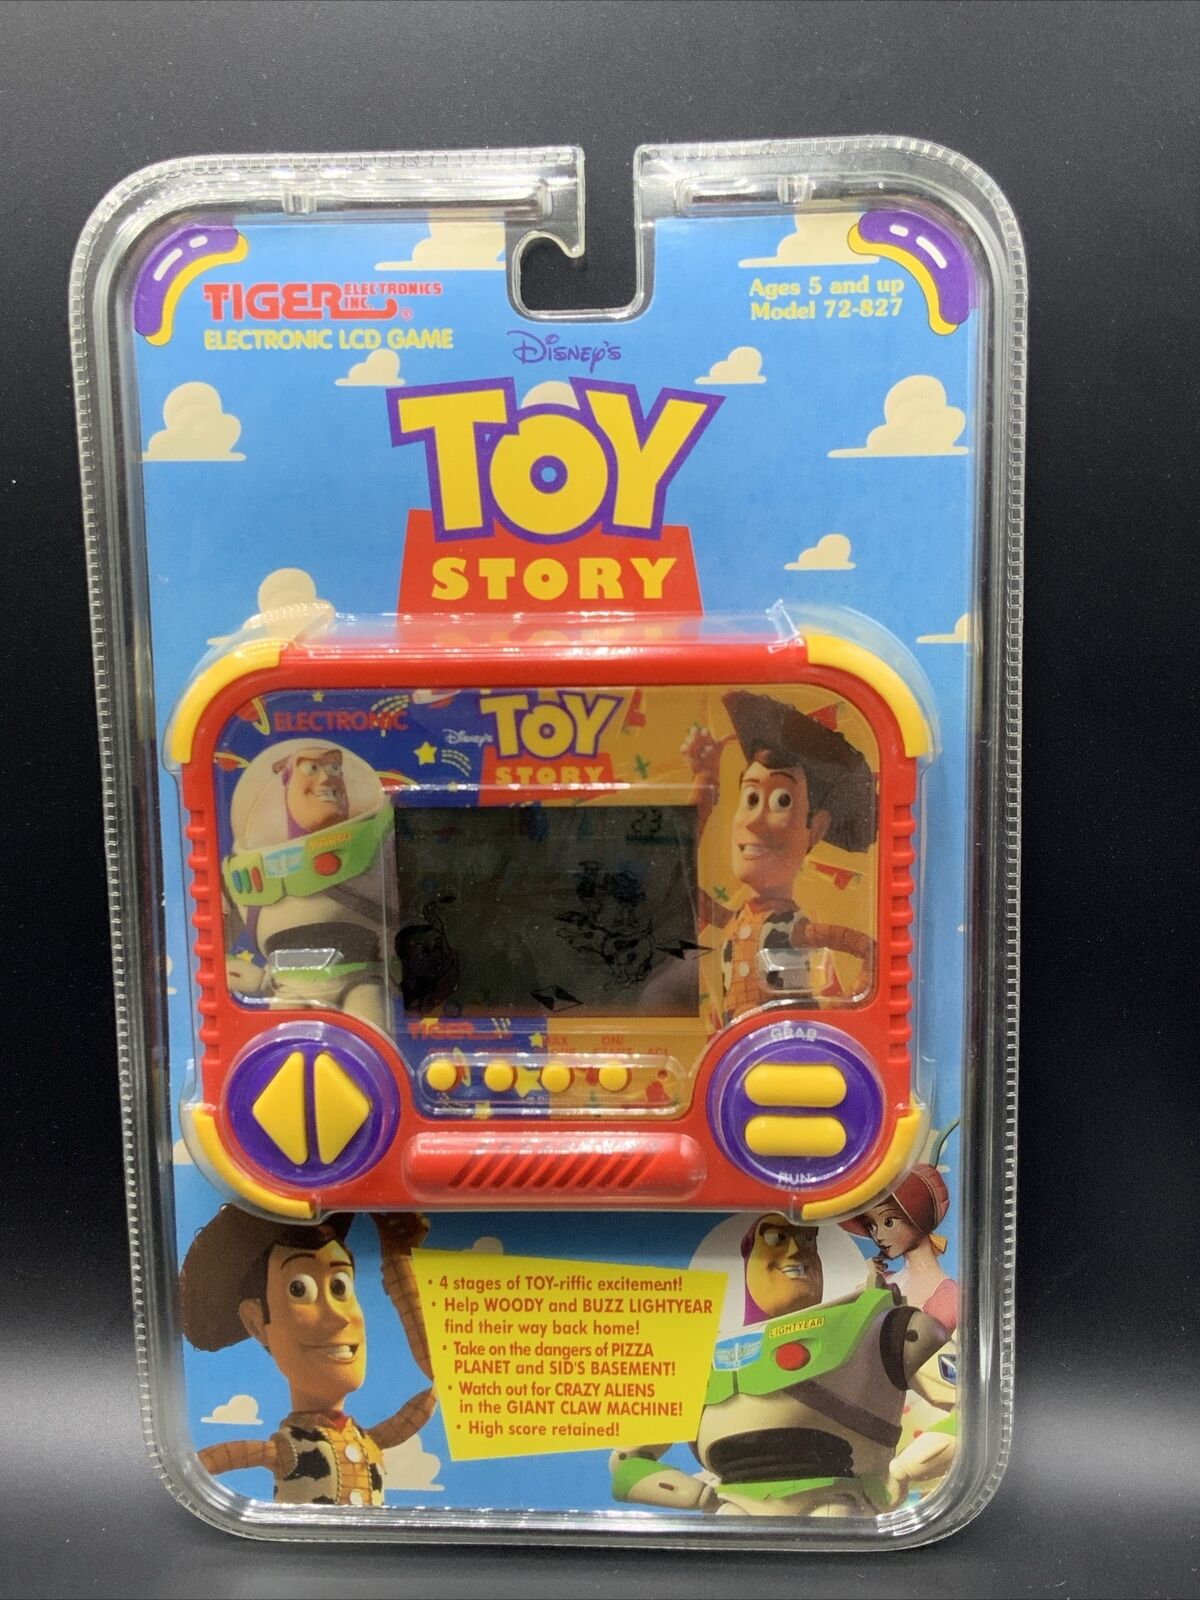 NEW IN PACKAGE Toy Story Rare 1996 TIGER Electronics #72-827 Hand Held LCD Game